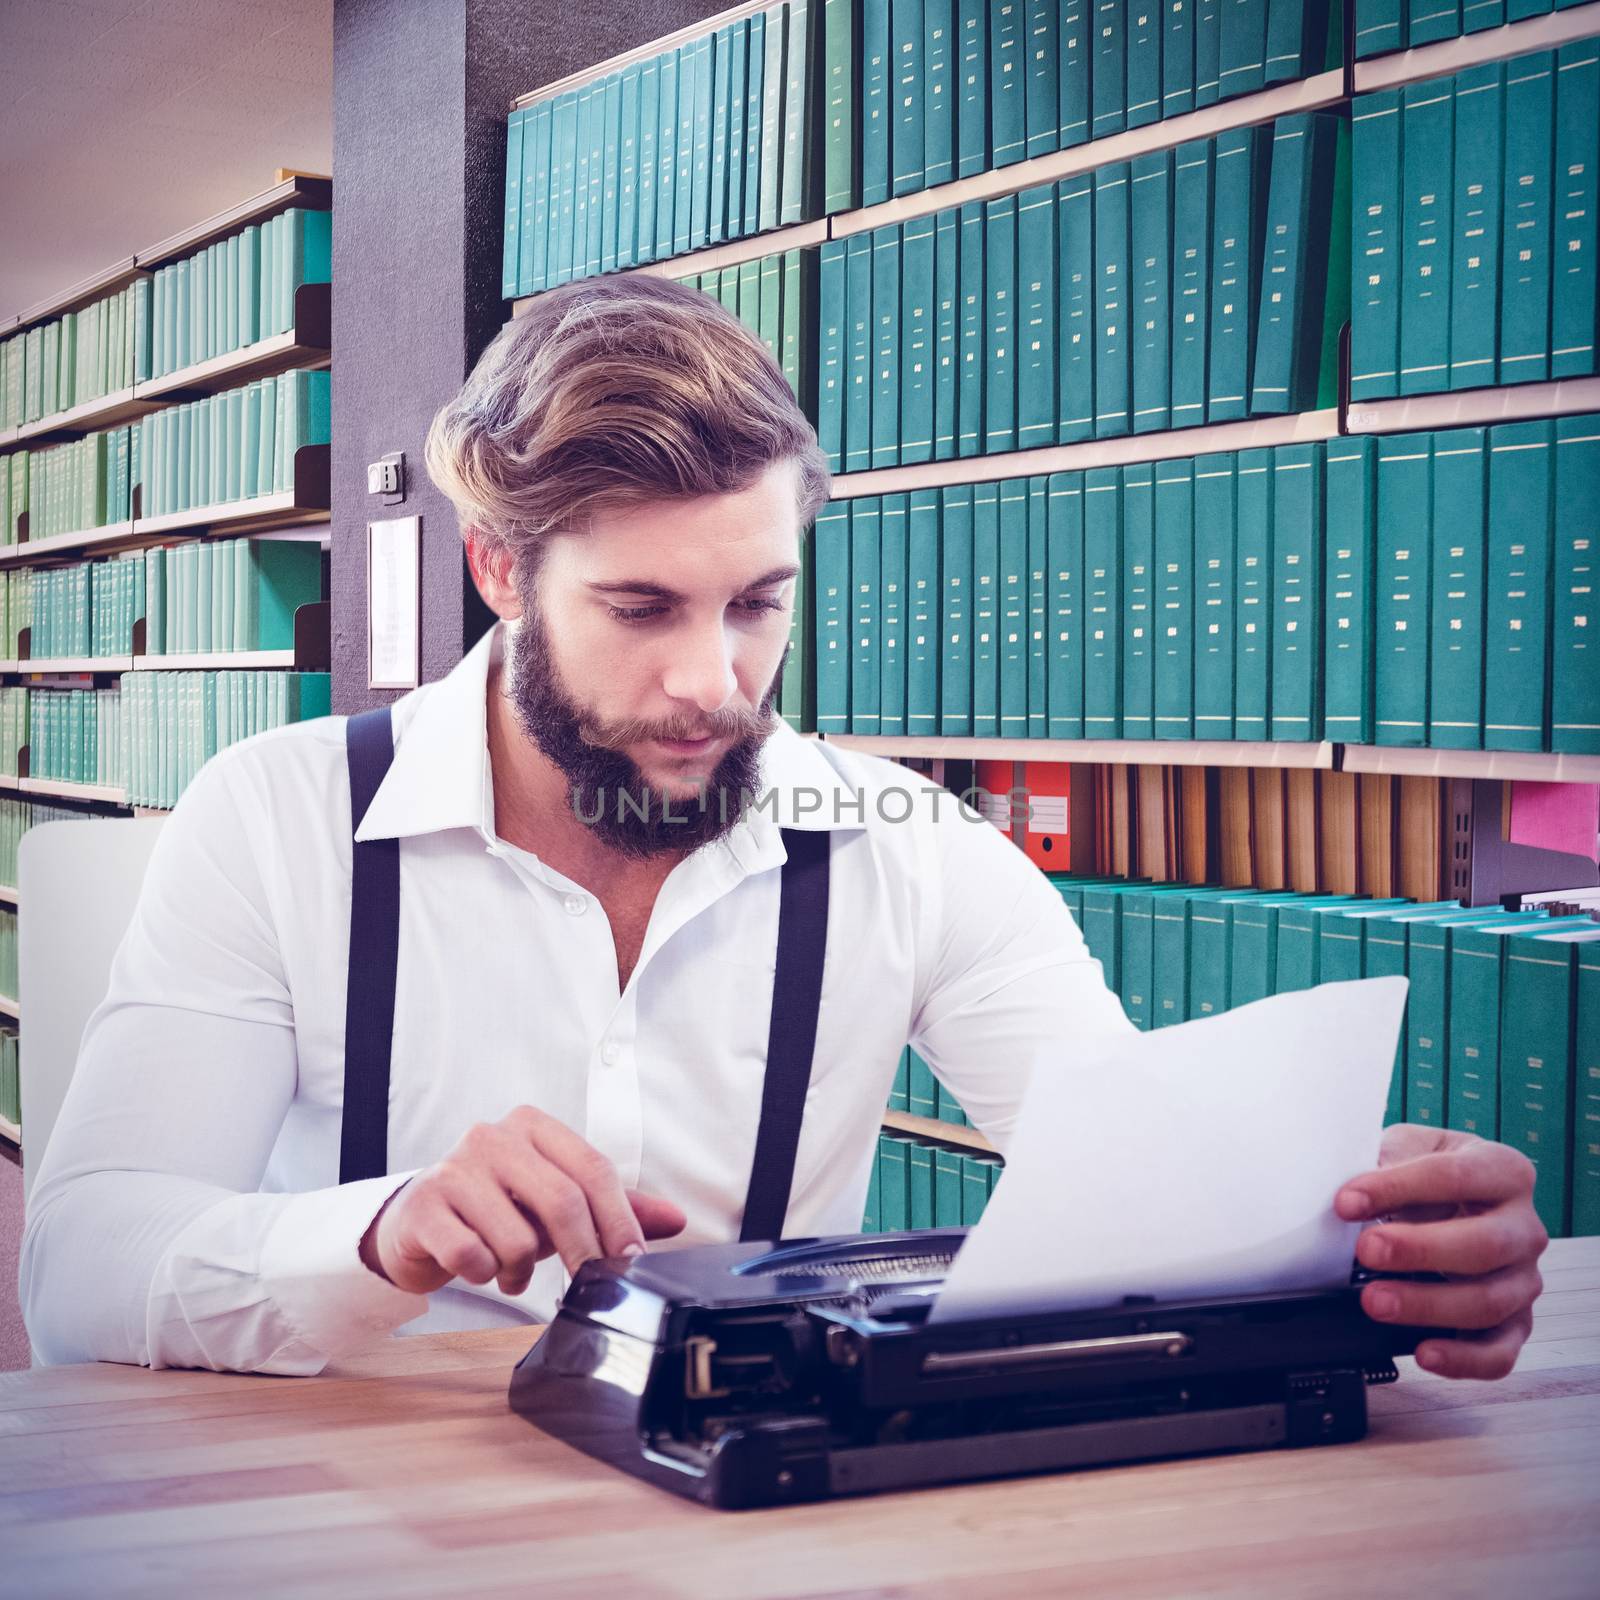 Hipster using typewriter at desk in office against close up of a bookshelf